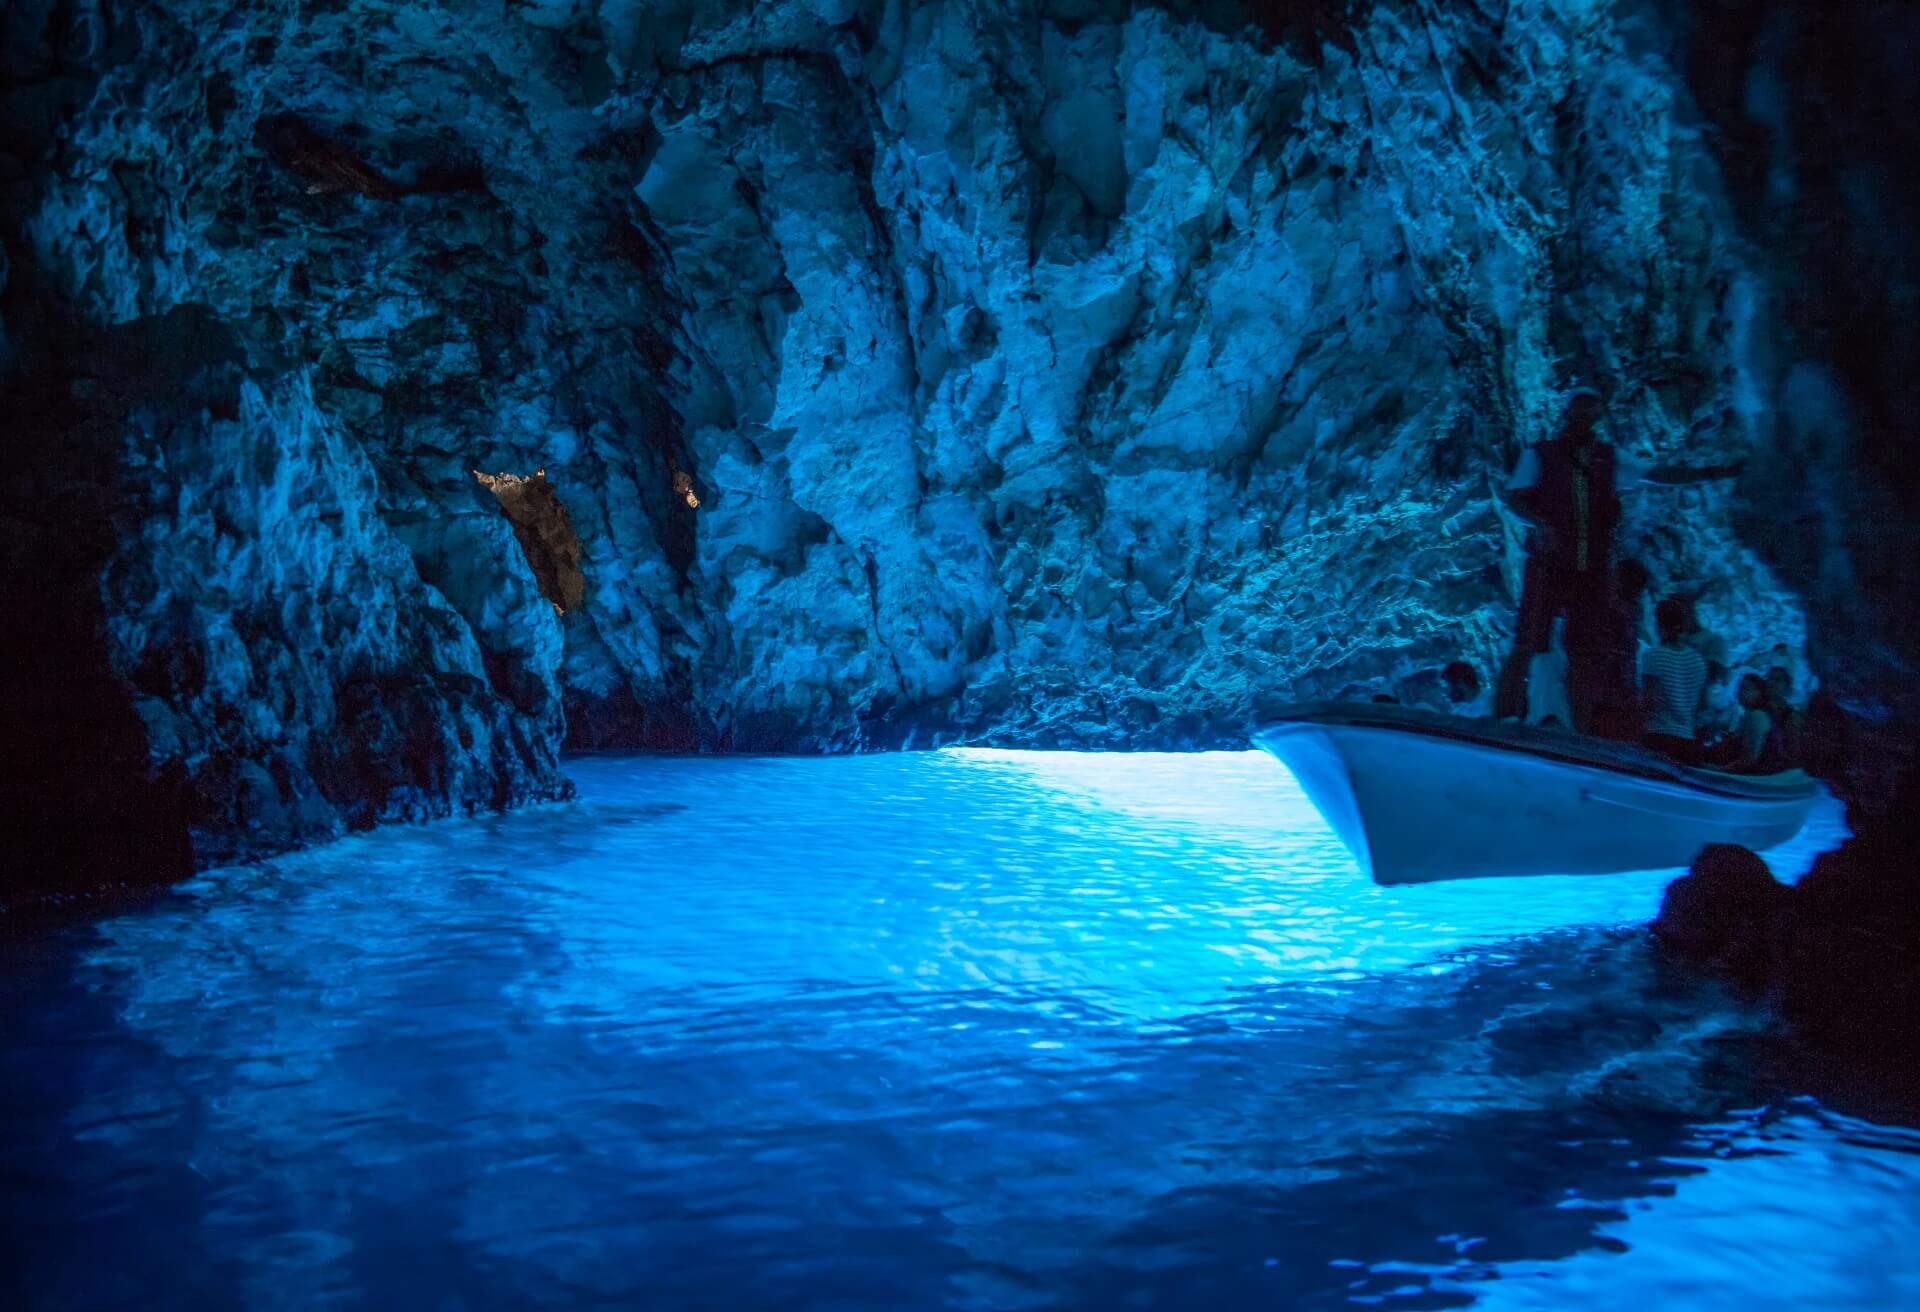 dest_croatia_bisevo_blue-grotto_gettyimages-878768858_universal_within-usage-period_29033